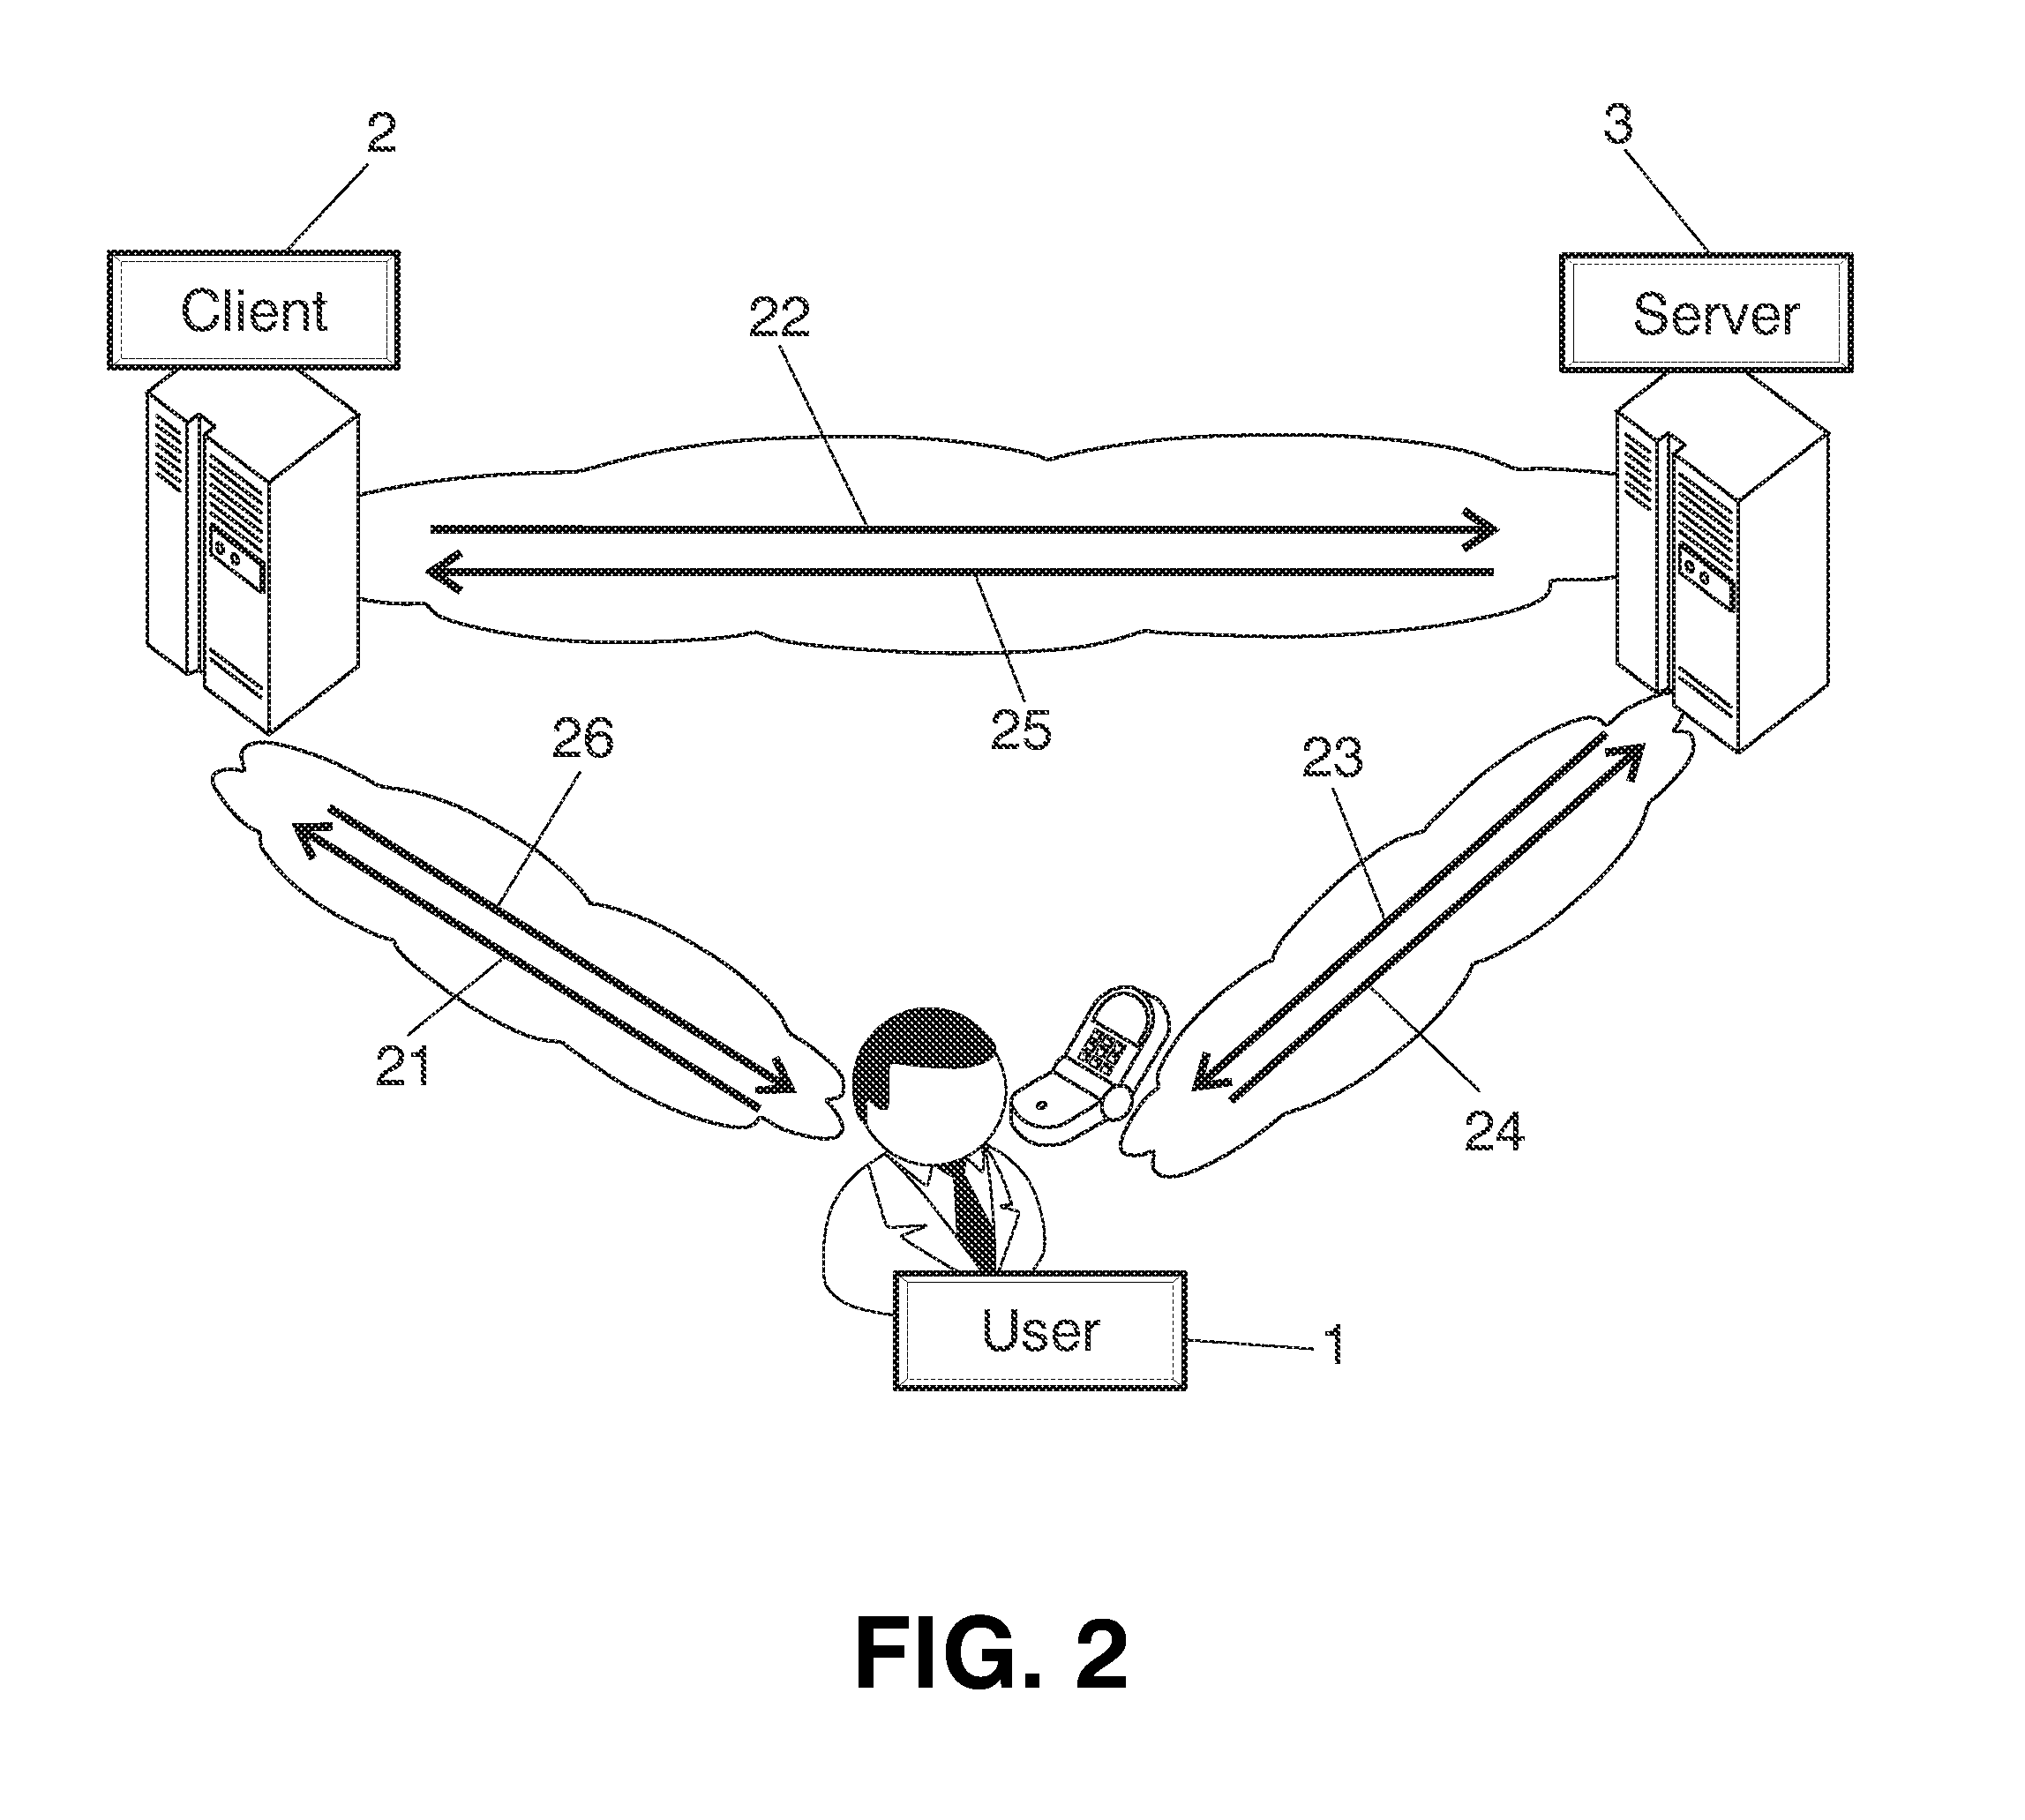 Method for authorizing access to protected content